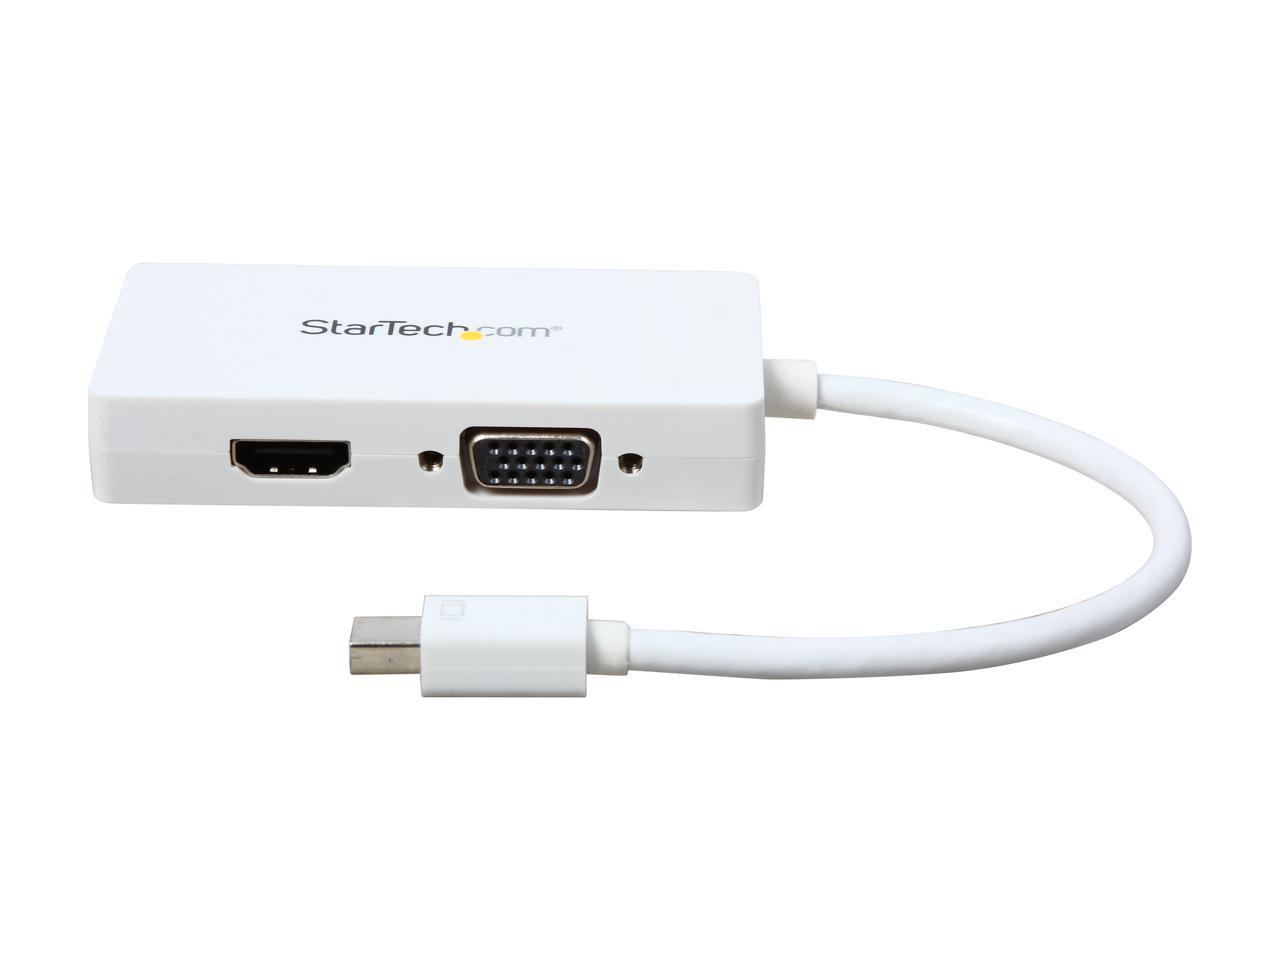 StarTech.com MDP2VGDVHDW Travel A/V Adapter: 3-in-1 Mini DisplayPort to VGA DVI or HDMI Converter - White - image 3 of 6